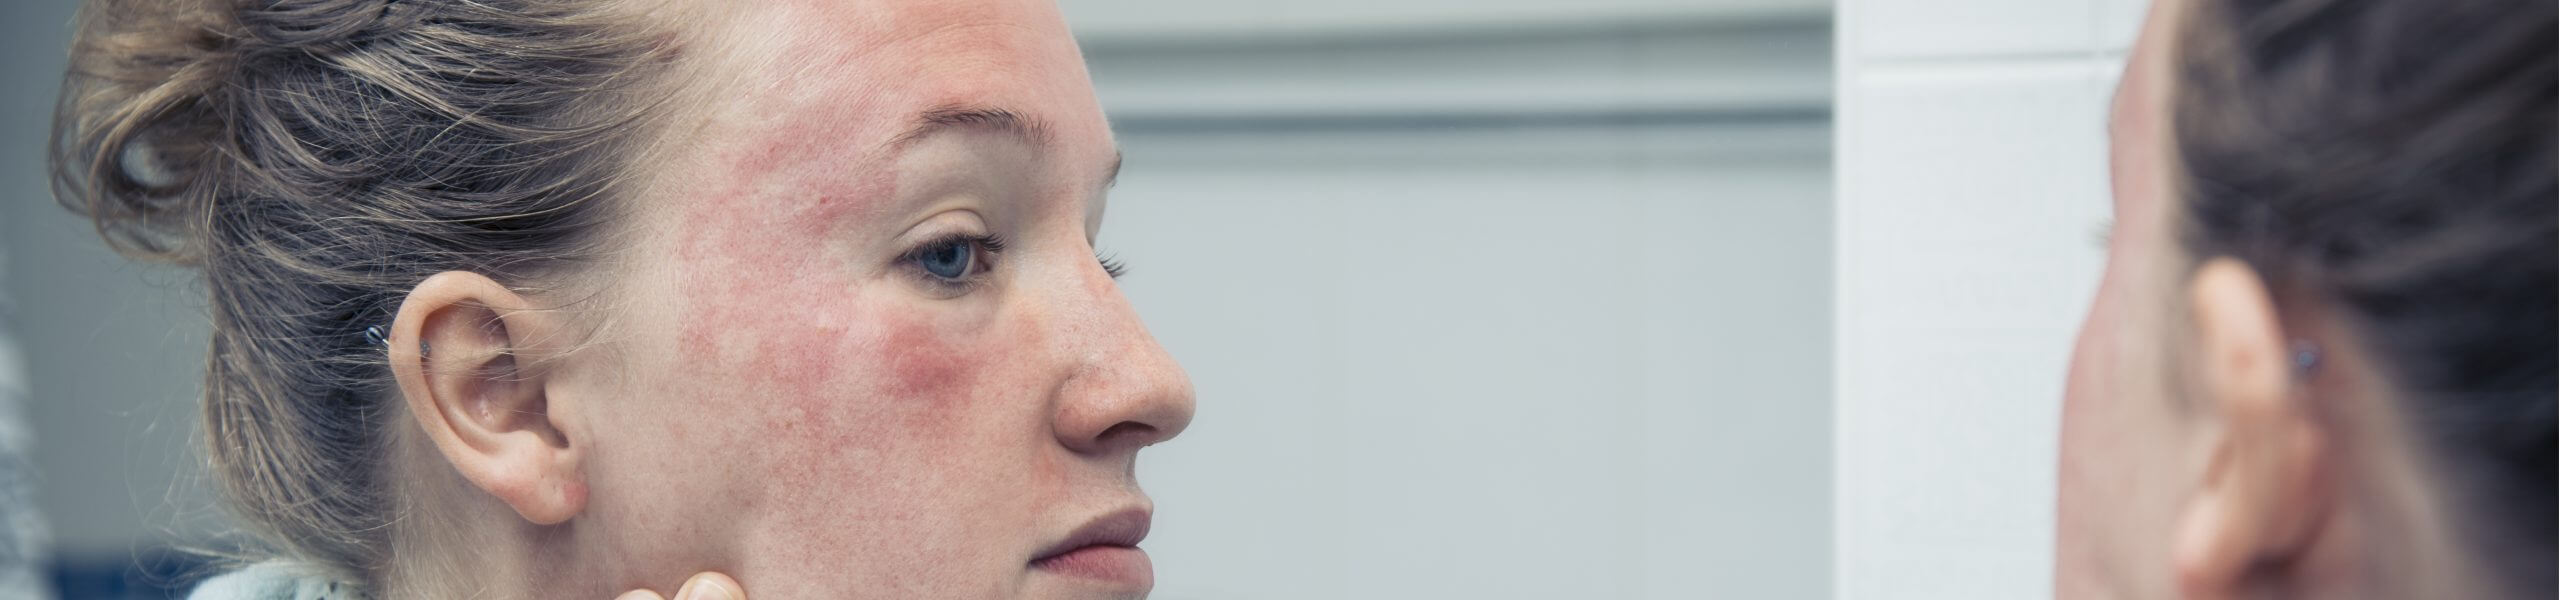 Woman with rosacea looking at the mirror